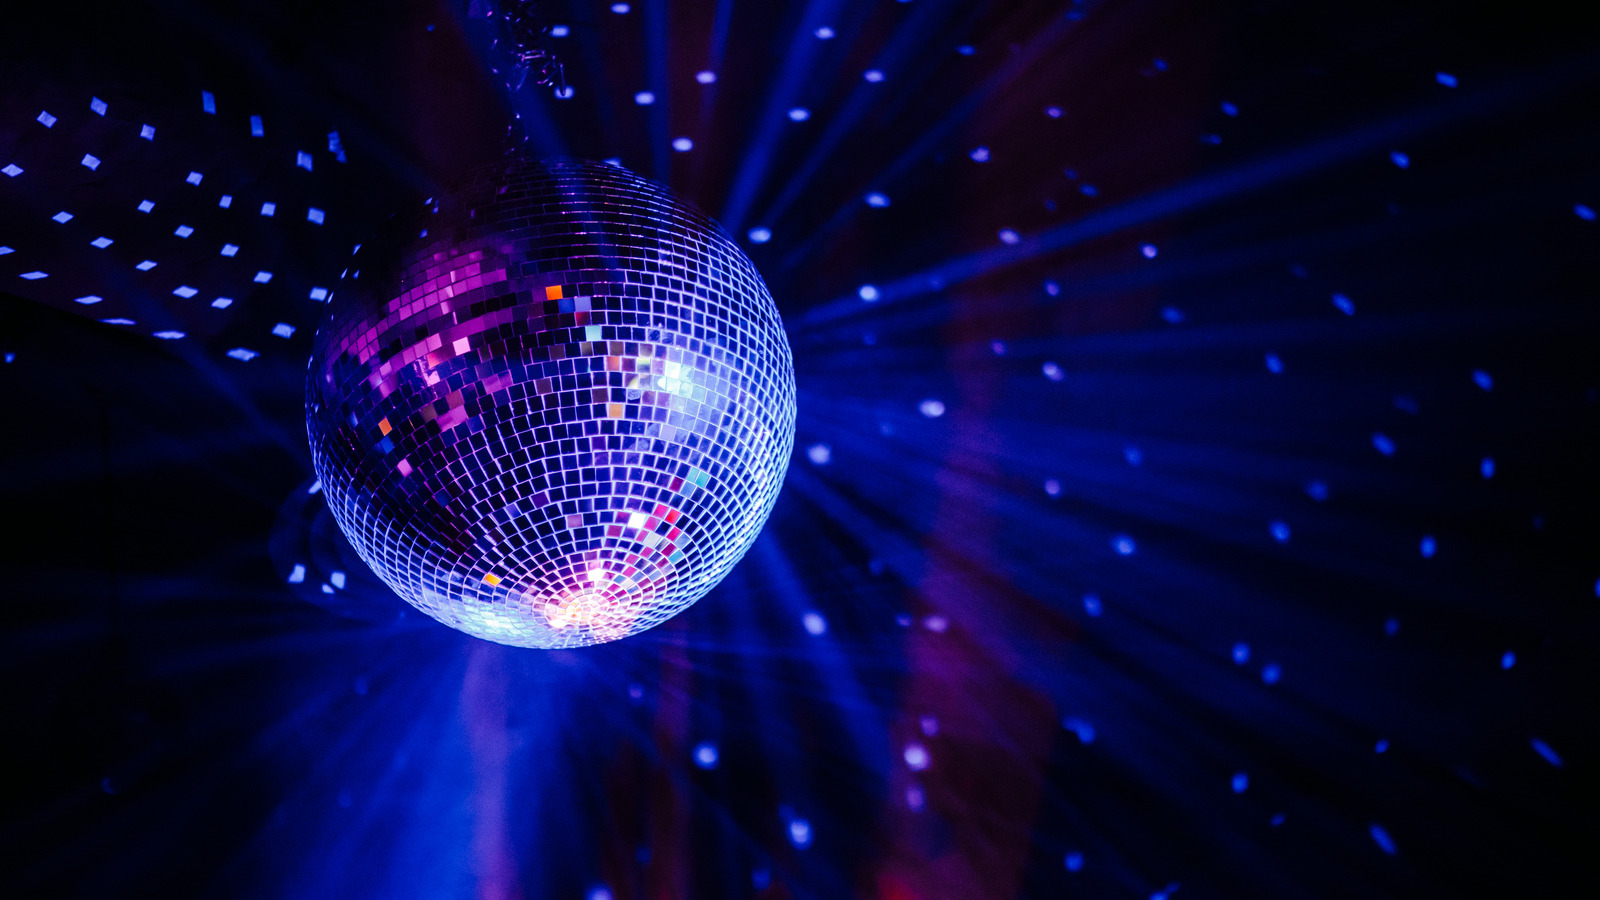 How to Incorporate a Disco Ball into Your Decor